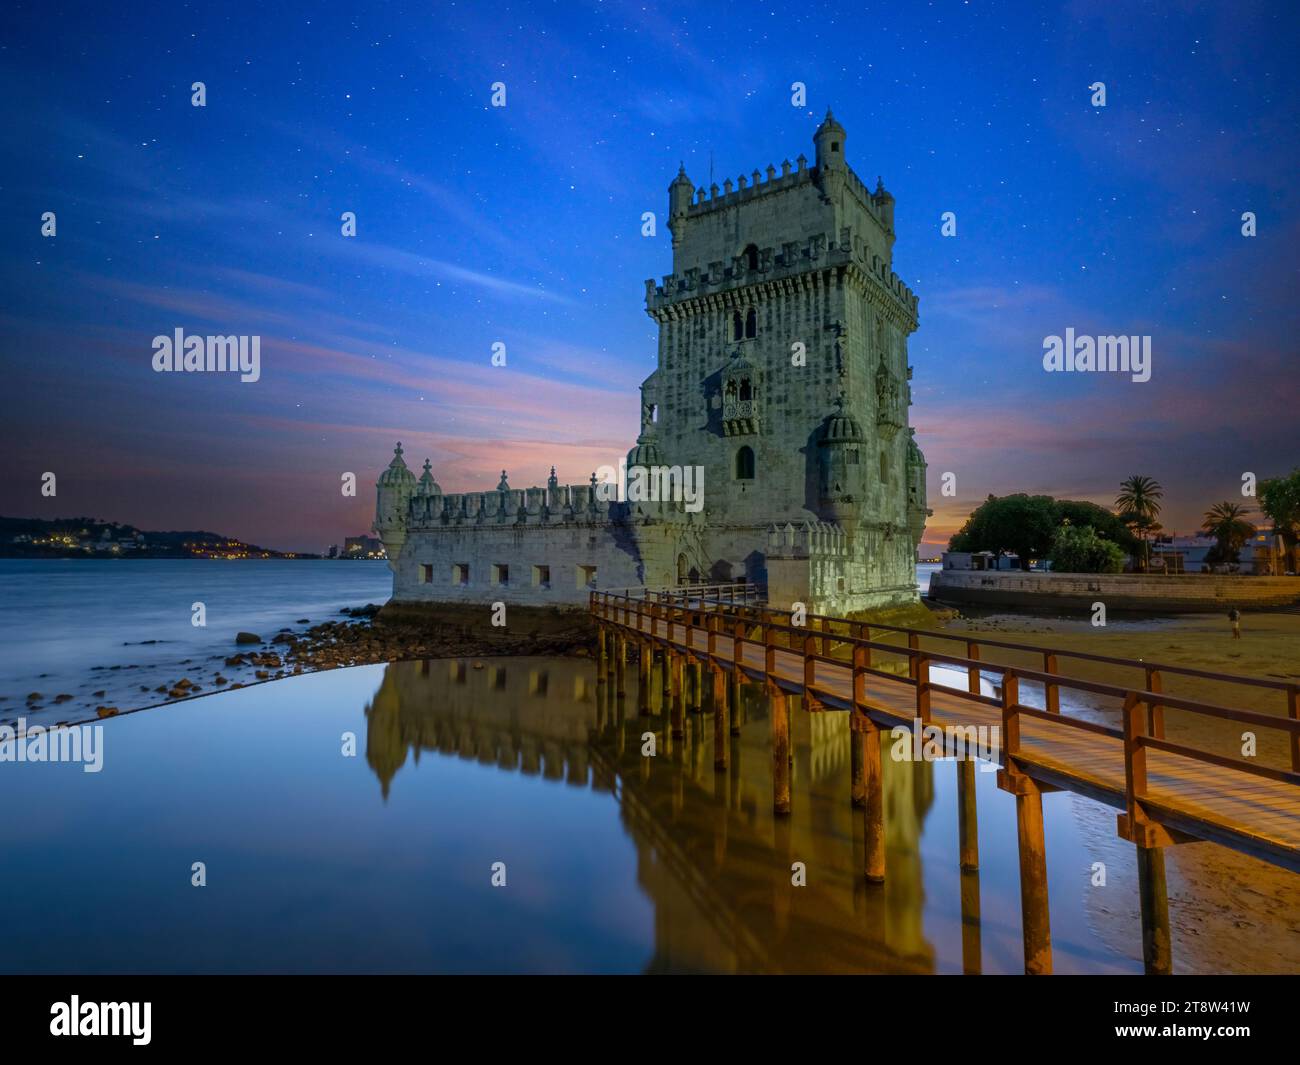 Belém Tower  officially the Tower of Saint Vincent (Portuguese: Torre de São Vicente) on the Tagus River built between 1514 & 1520  in Lisbon Portugal Stock Photo